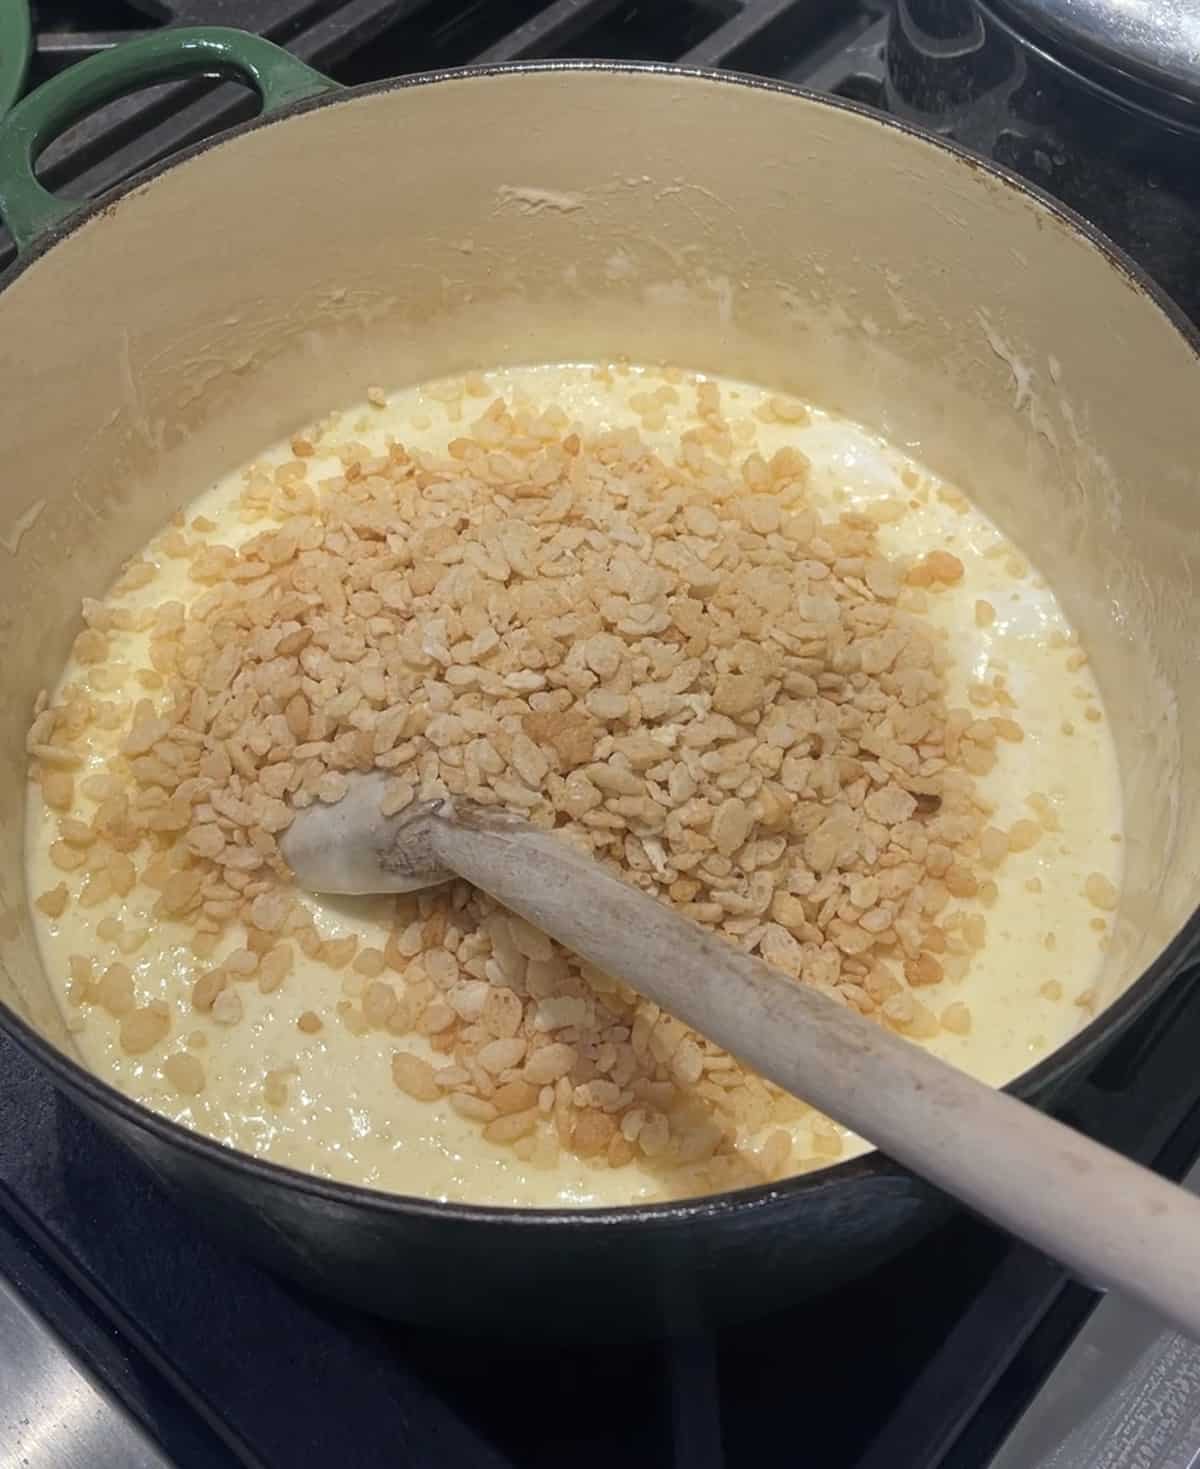 Adding rice cereal to melted butter and marshmallows in saucepan.